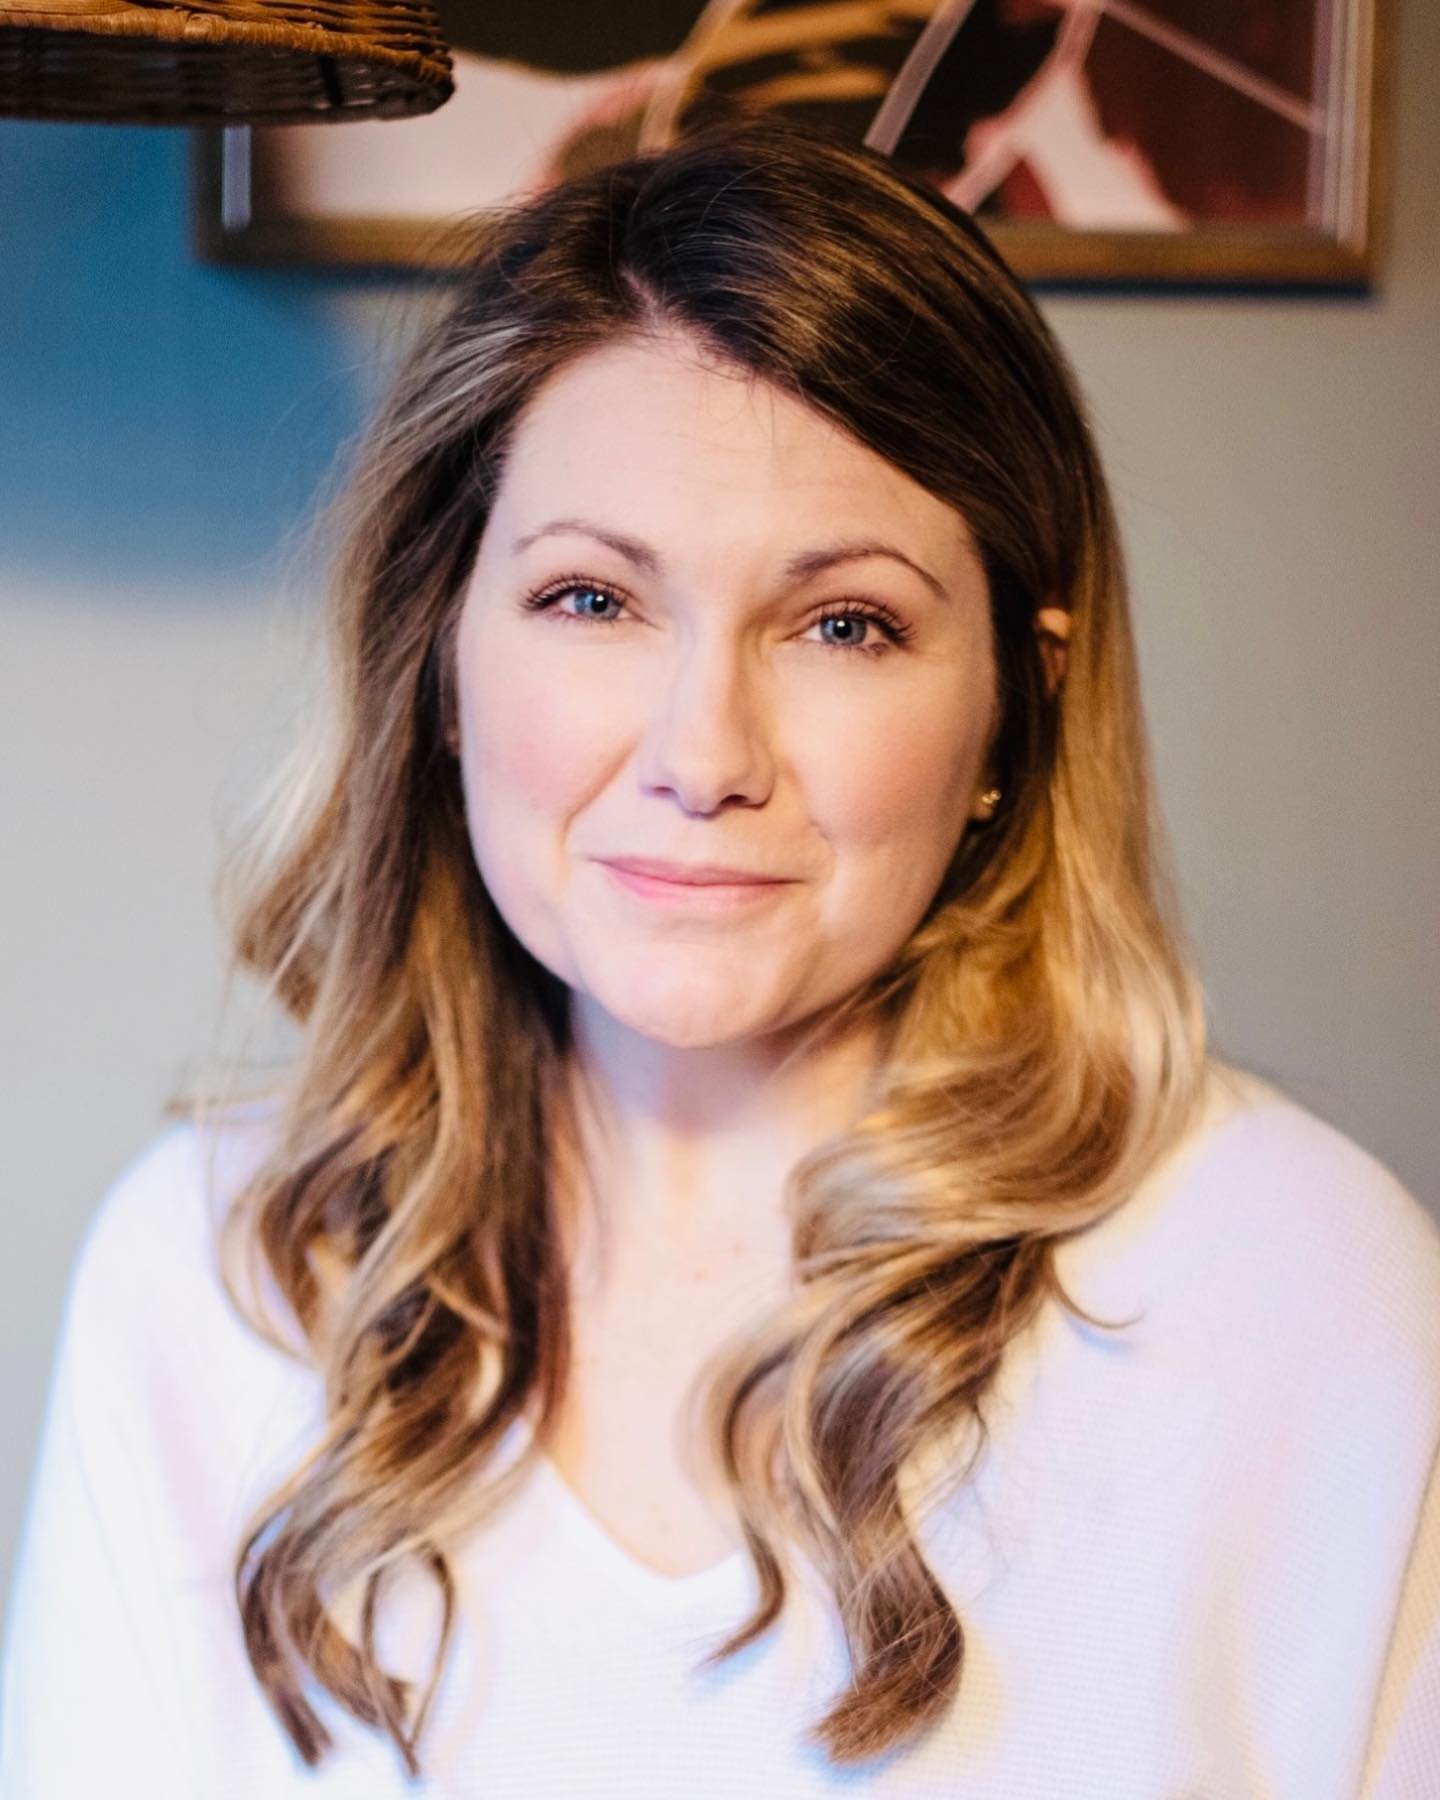 This week we&rsquo;re celebrating Steffany Hauenstein of @livingwellhc, as it&rsquo;s National Nurses Week! Nurses make a huge difference in the lives of others, and as a Nurse Practitioner specializing in lifestyle medicine and wellness coaching, St